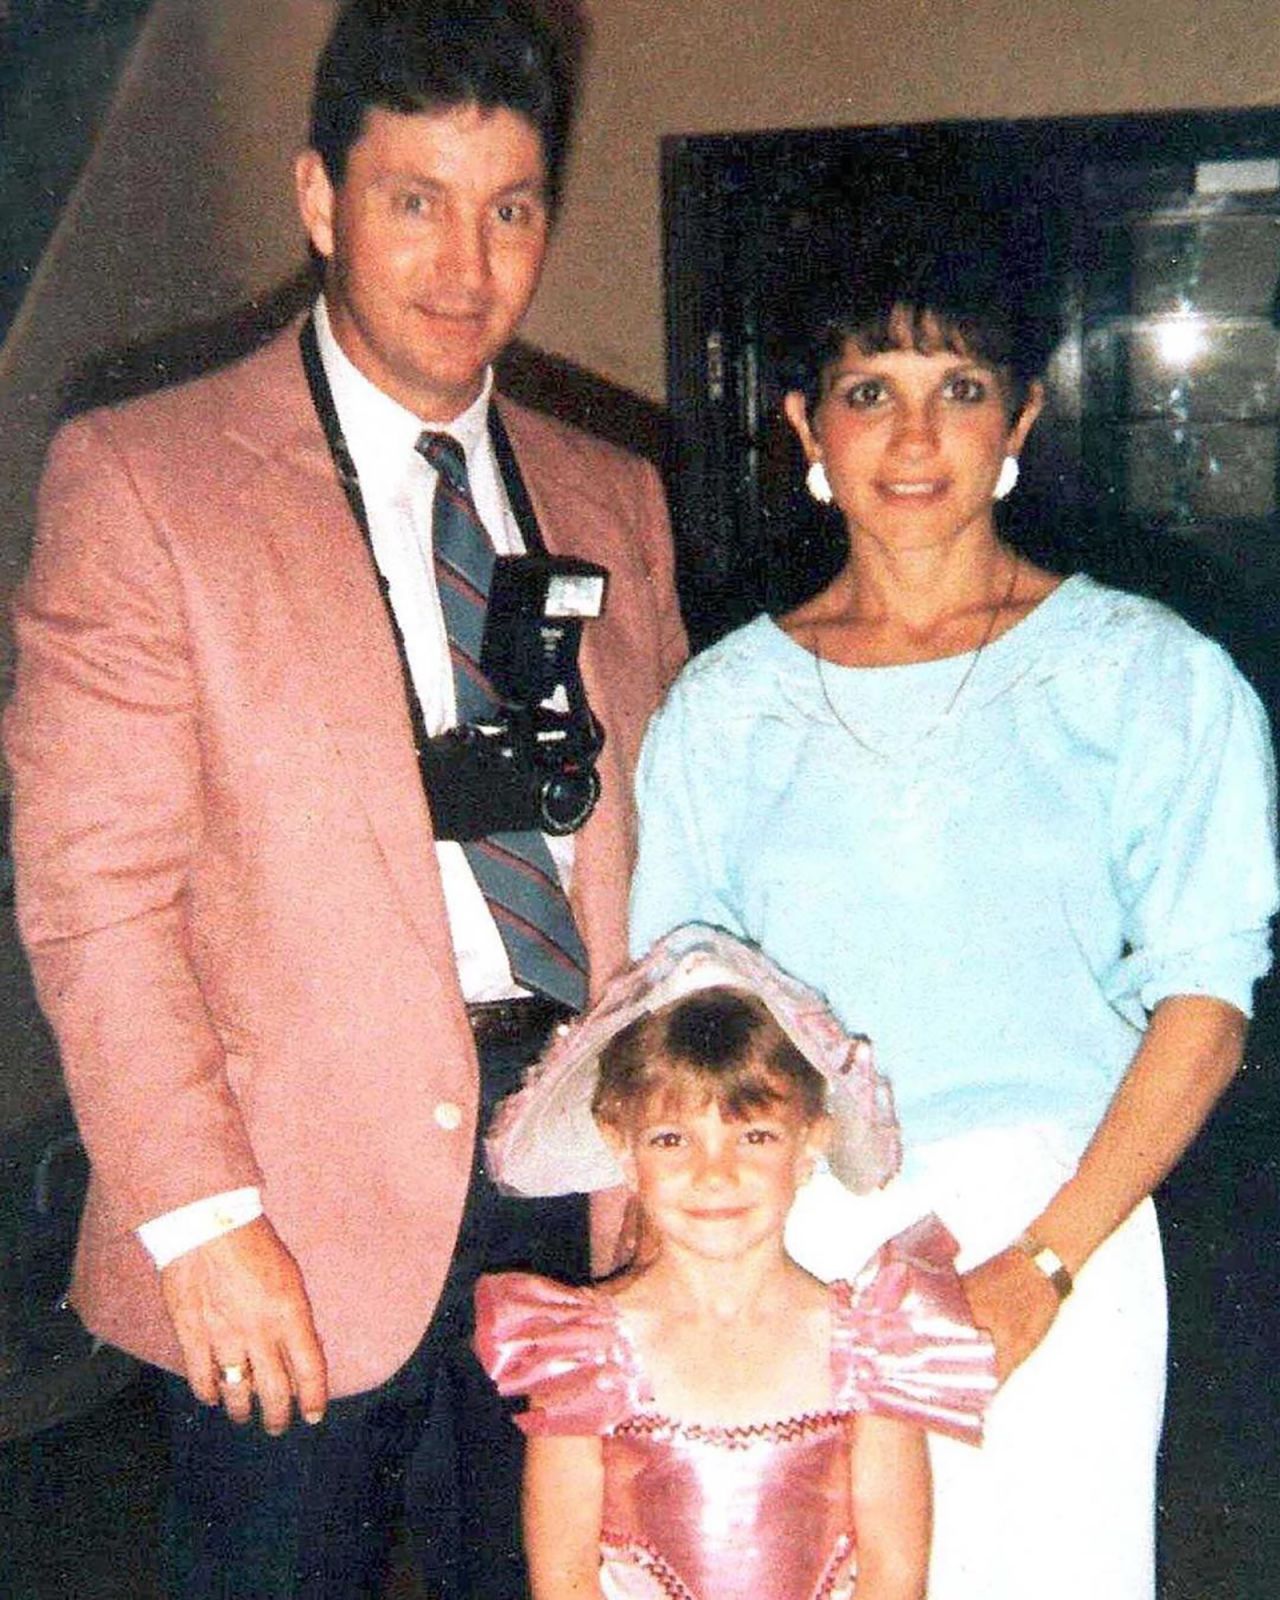 Spears, seen here with her parents in an old photo<a href="https://www.instagram.com/p/BsOGMGIAXLe/" target="_blank" target="_blank"> she posted to Instagram,</a> was born December 2, 1981, in McComb, Mississippi.